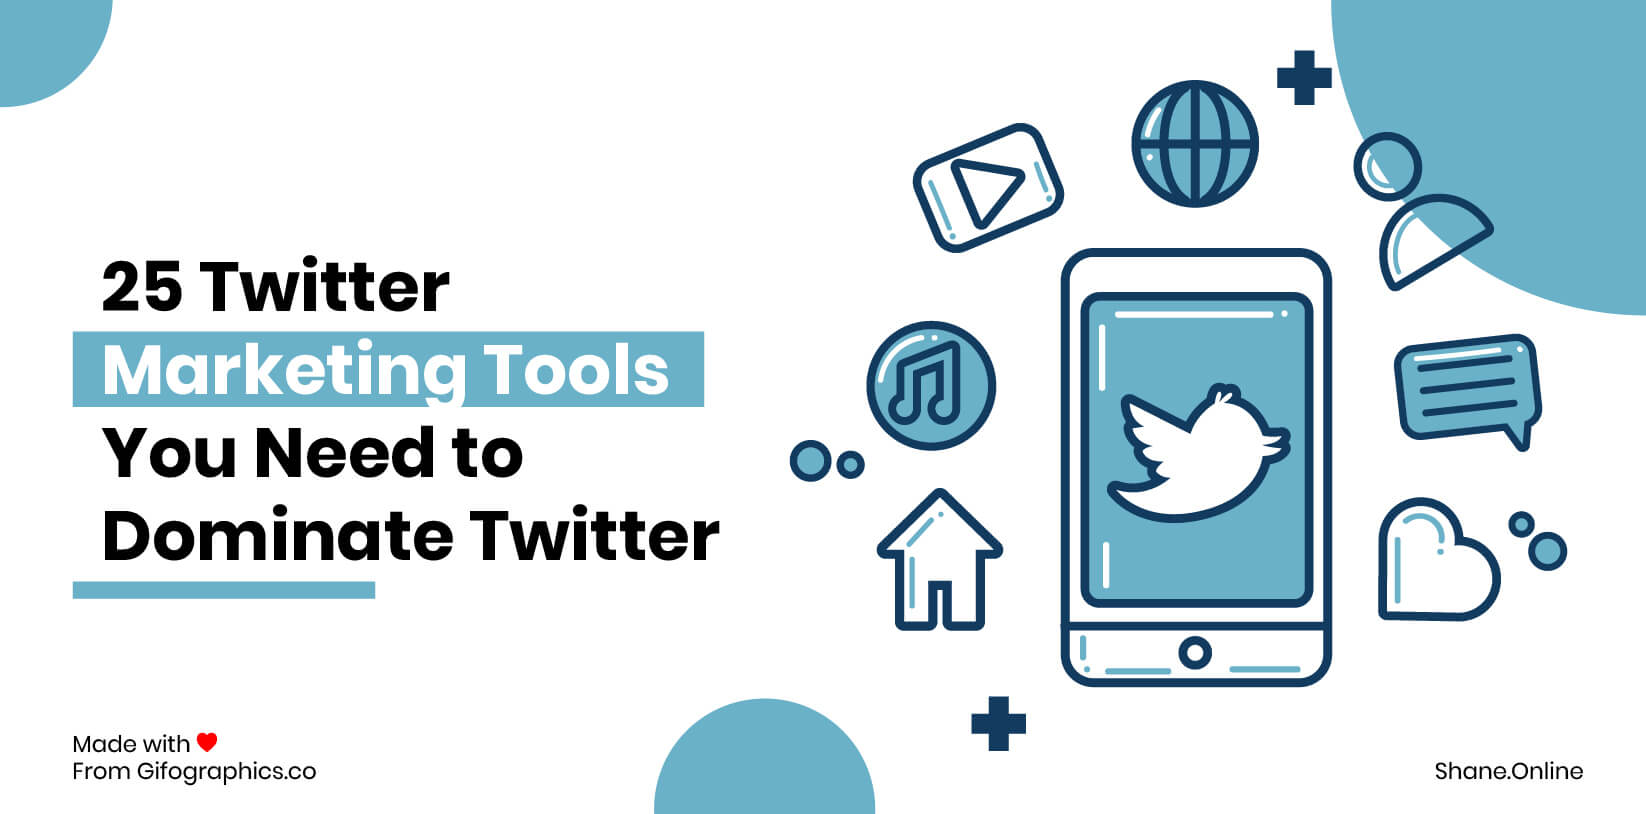 25 Twitter Marketing Tools You Need to Dominate Twitter